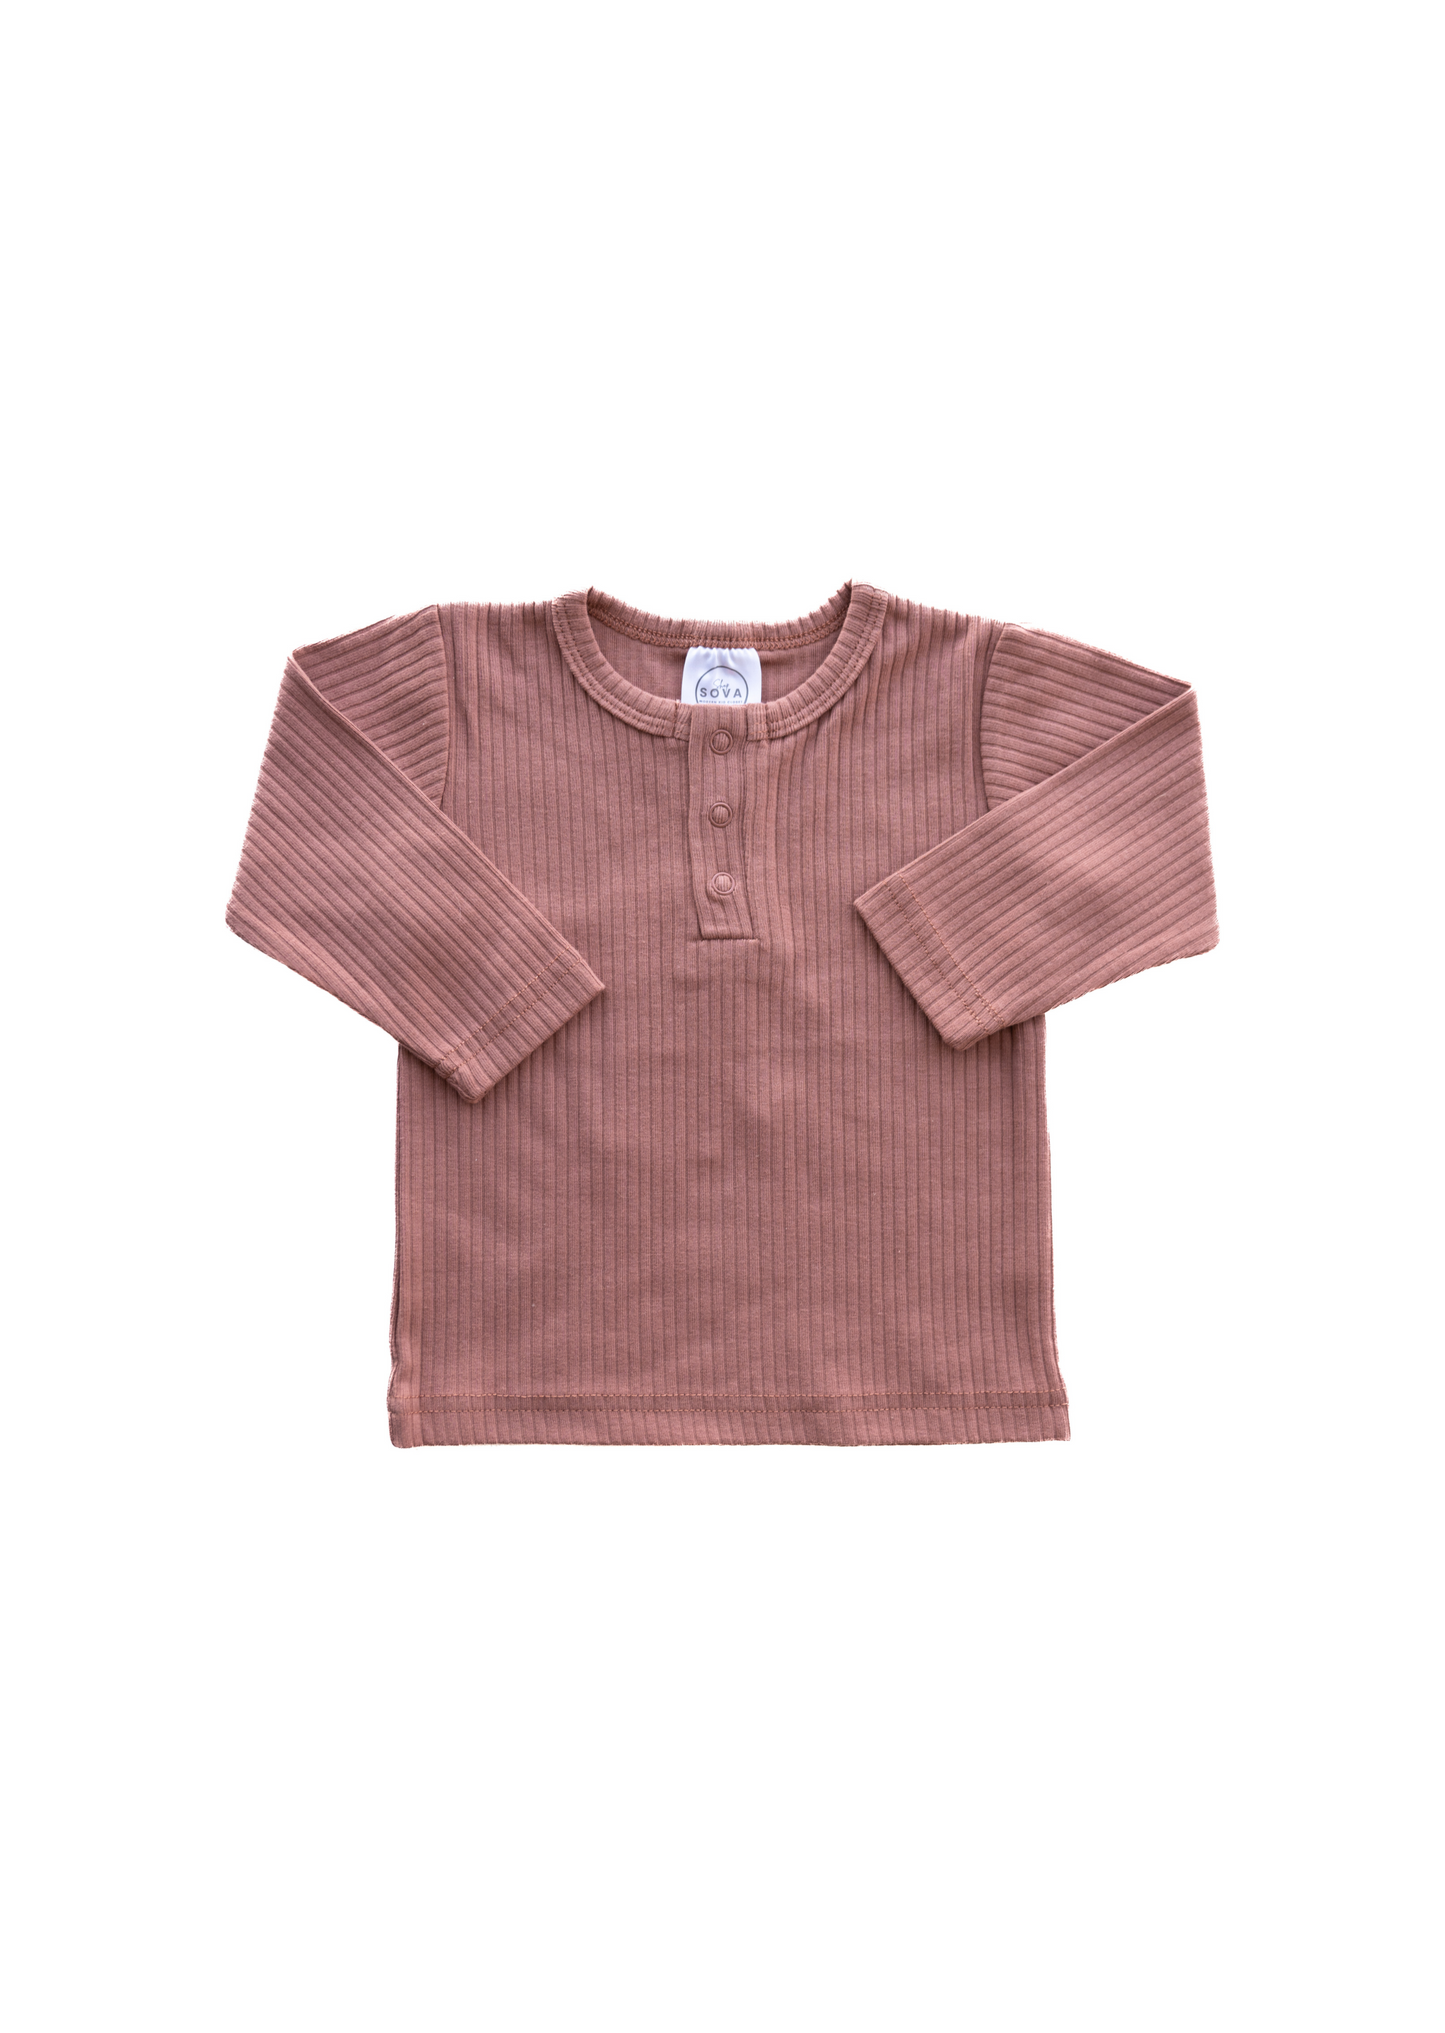 RIBBED HENLEY IN ROSE